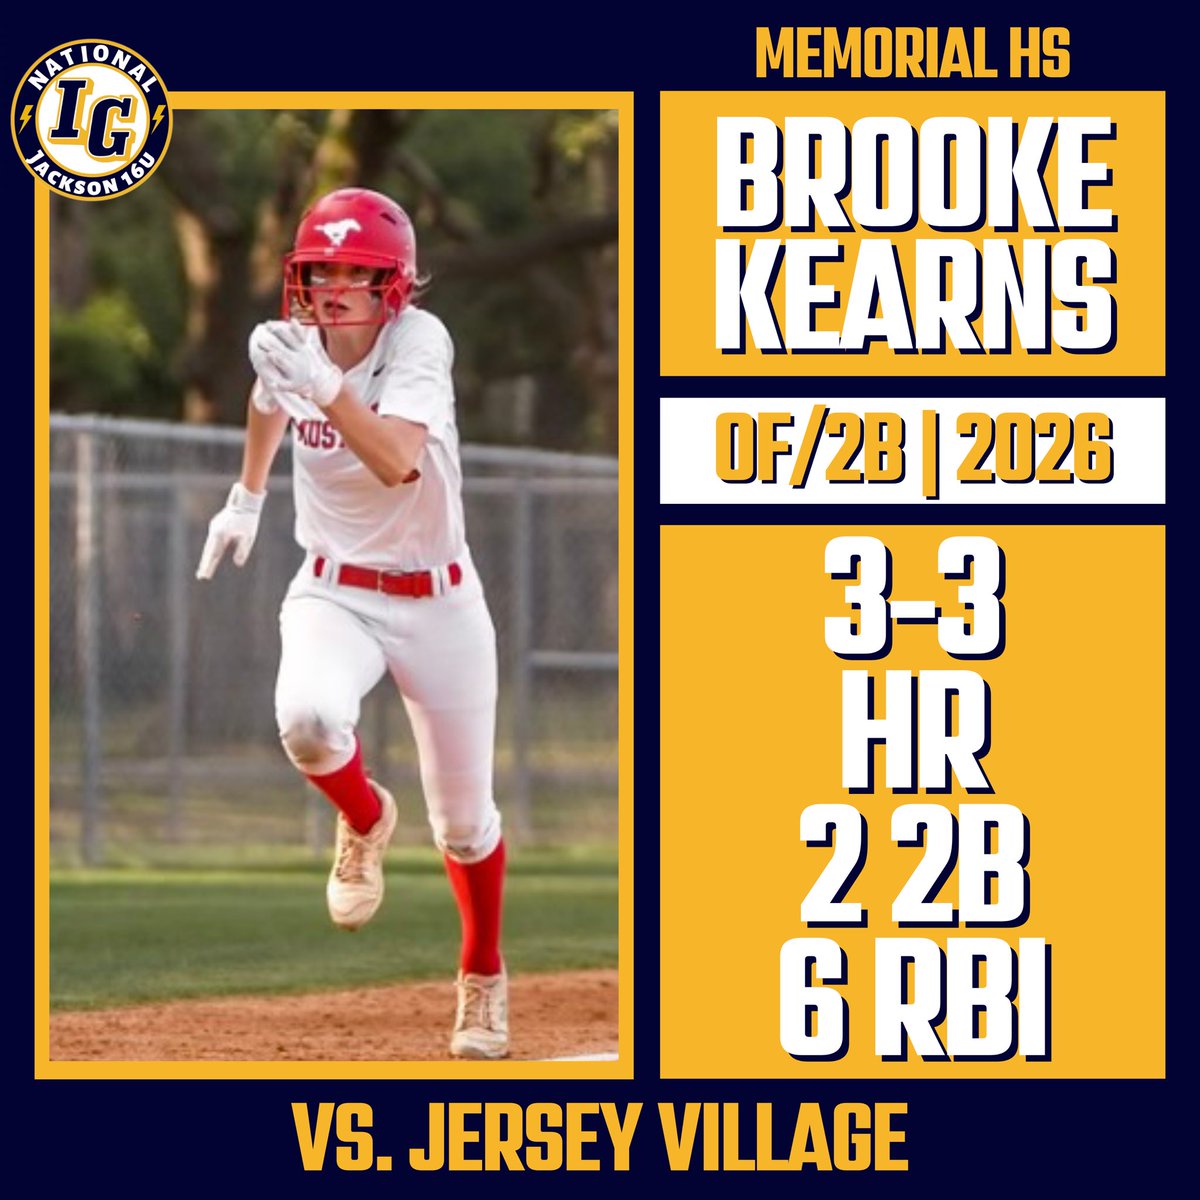 2026 OF/2B @BrookeKearns7 had a perfect day at the plate going 3-3 with a GRAND SLAM, and two doubles!! Way to go Brooke!! #betheimpact #trusttheprocess #goldblooded #igjackson16u